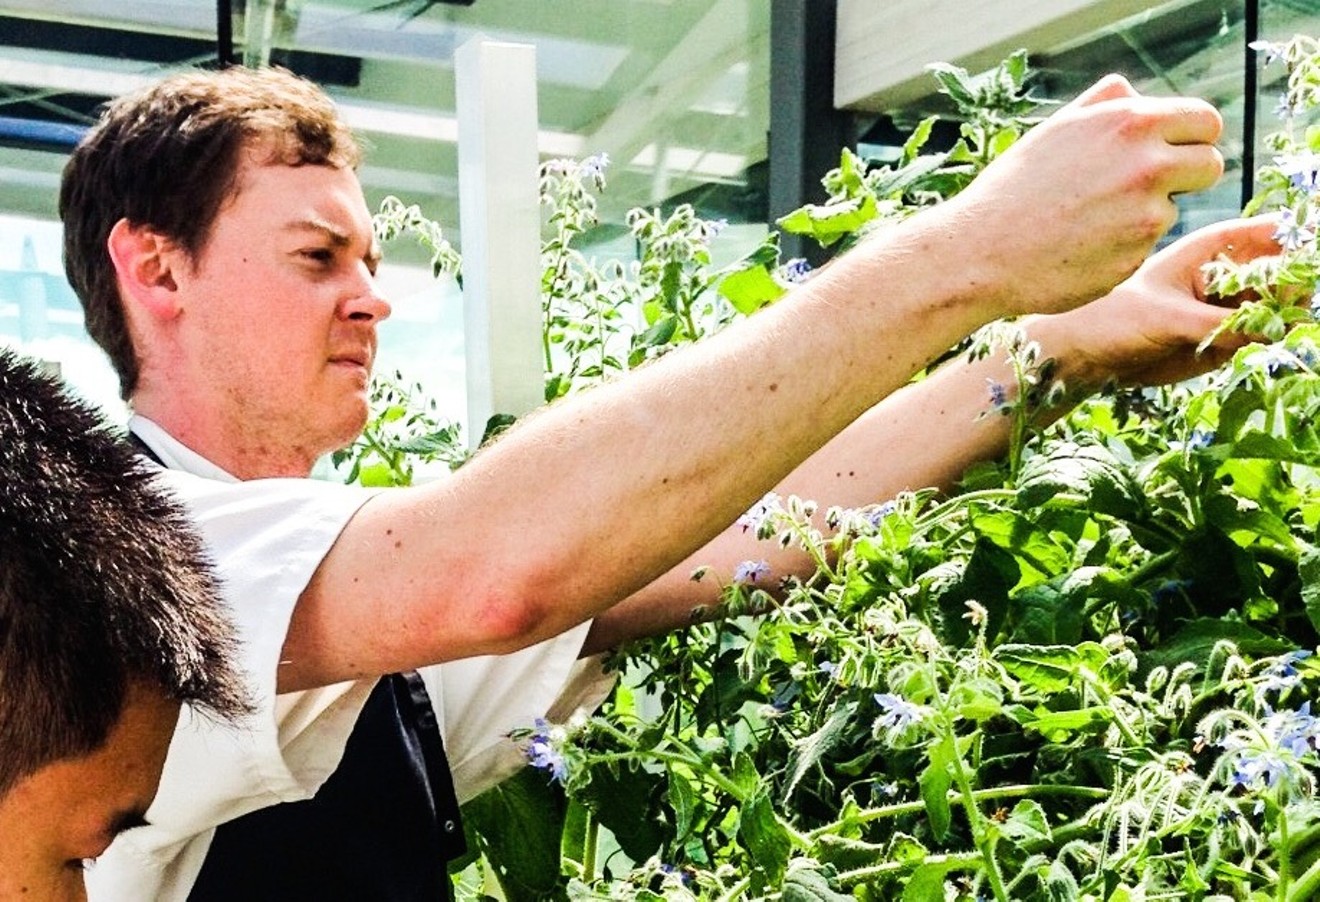 Chef Clay Inscoe likes to pick his own herbs.